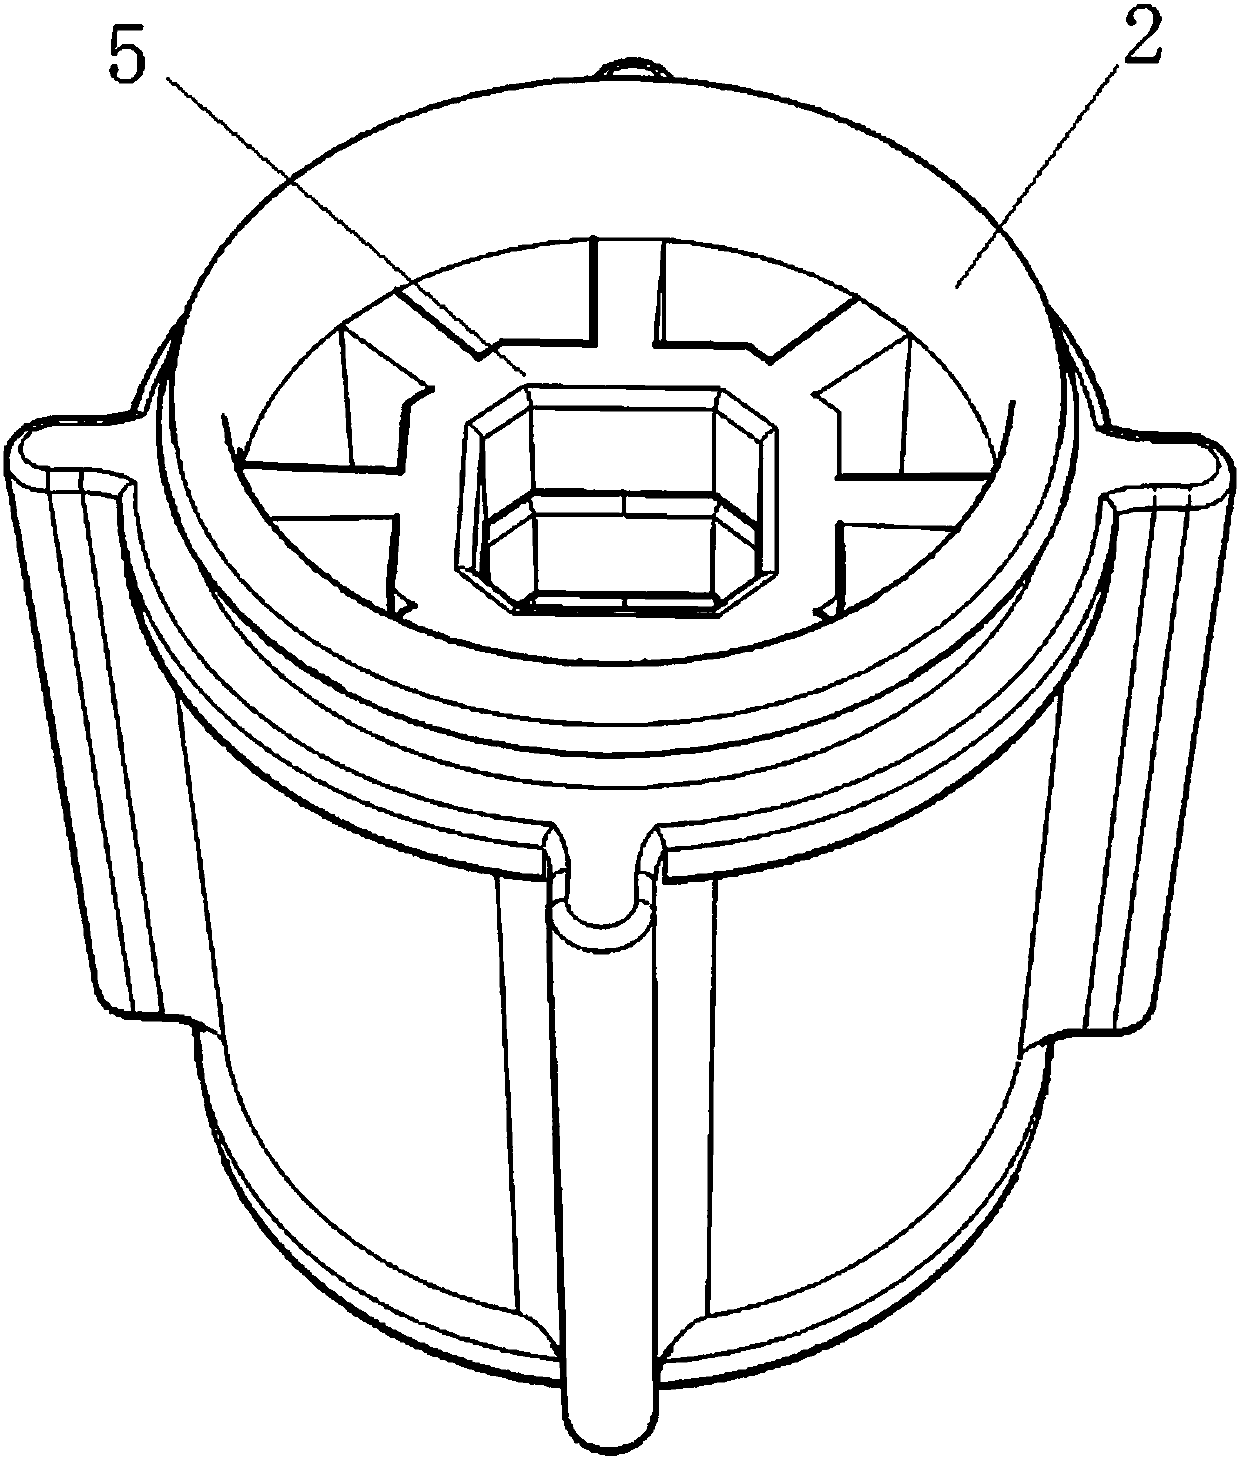 Compression type water intake pipe device